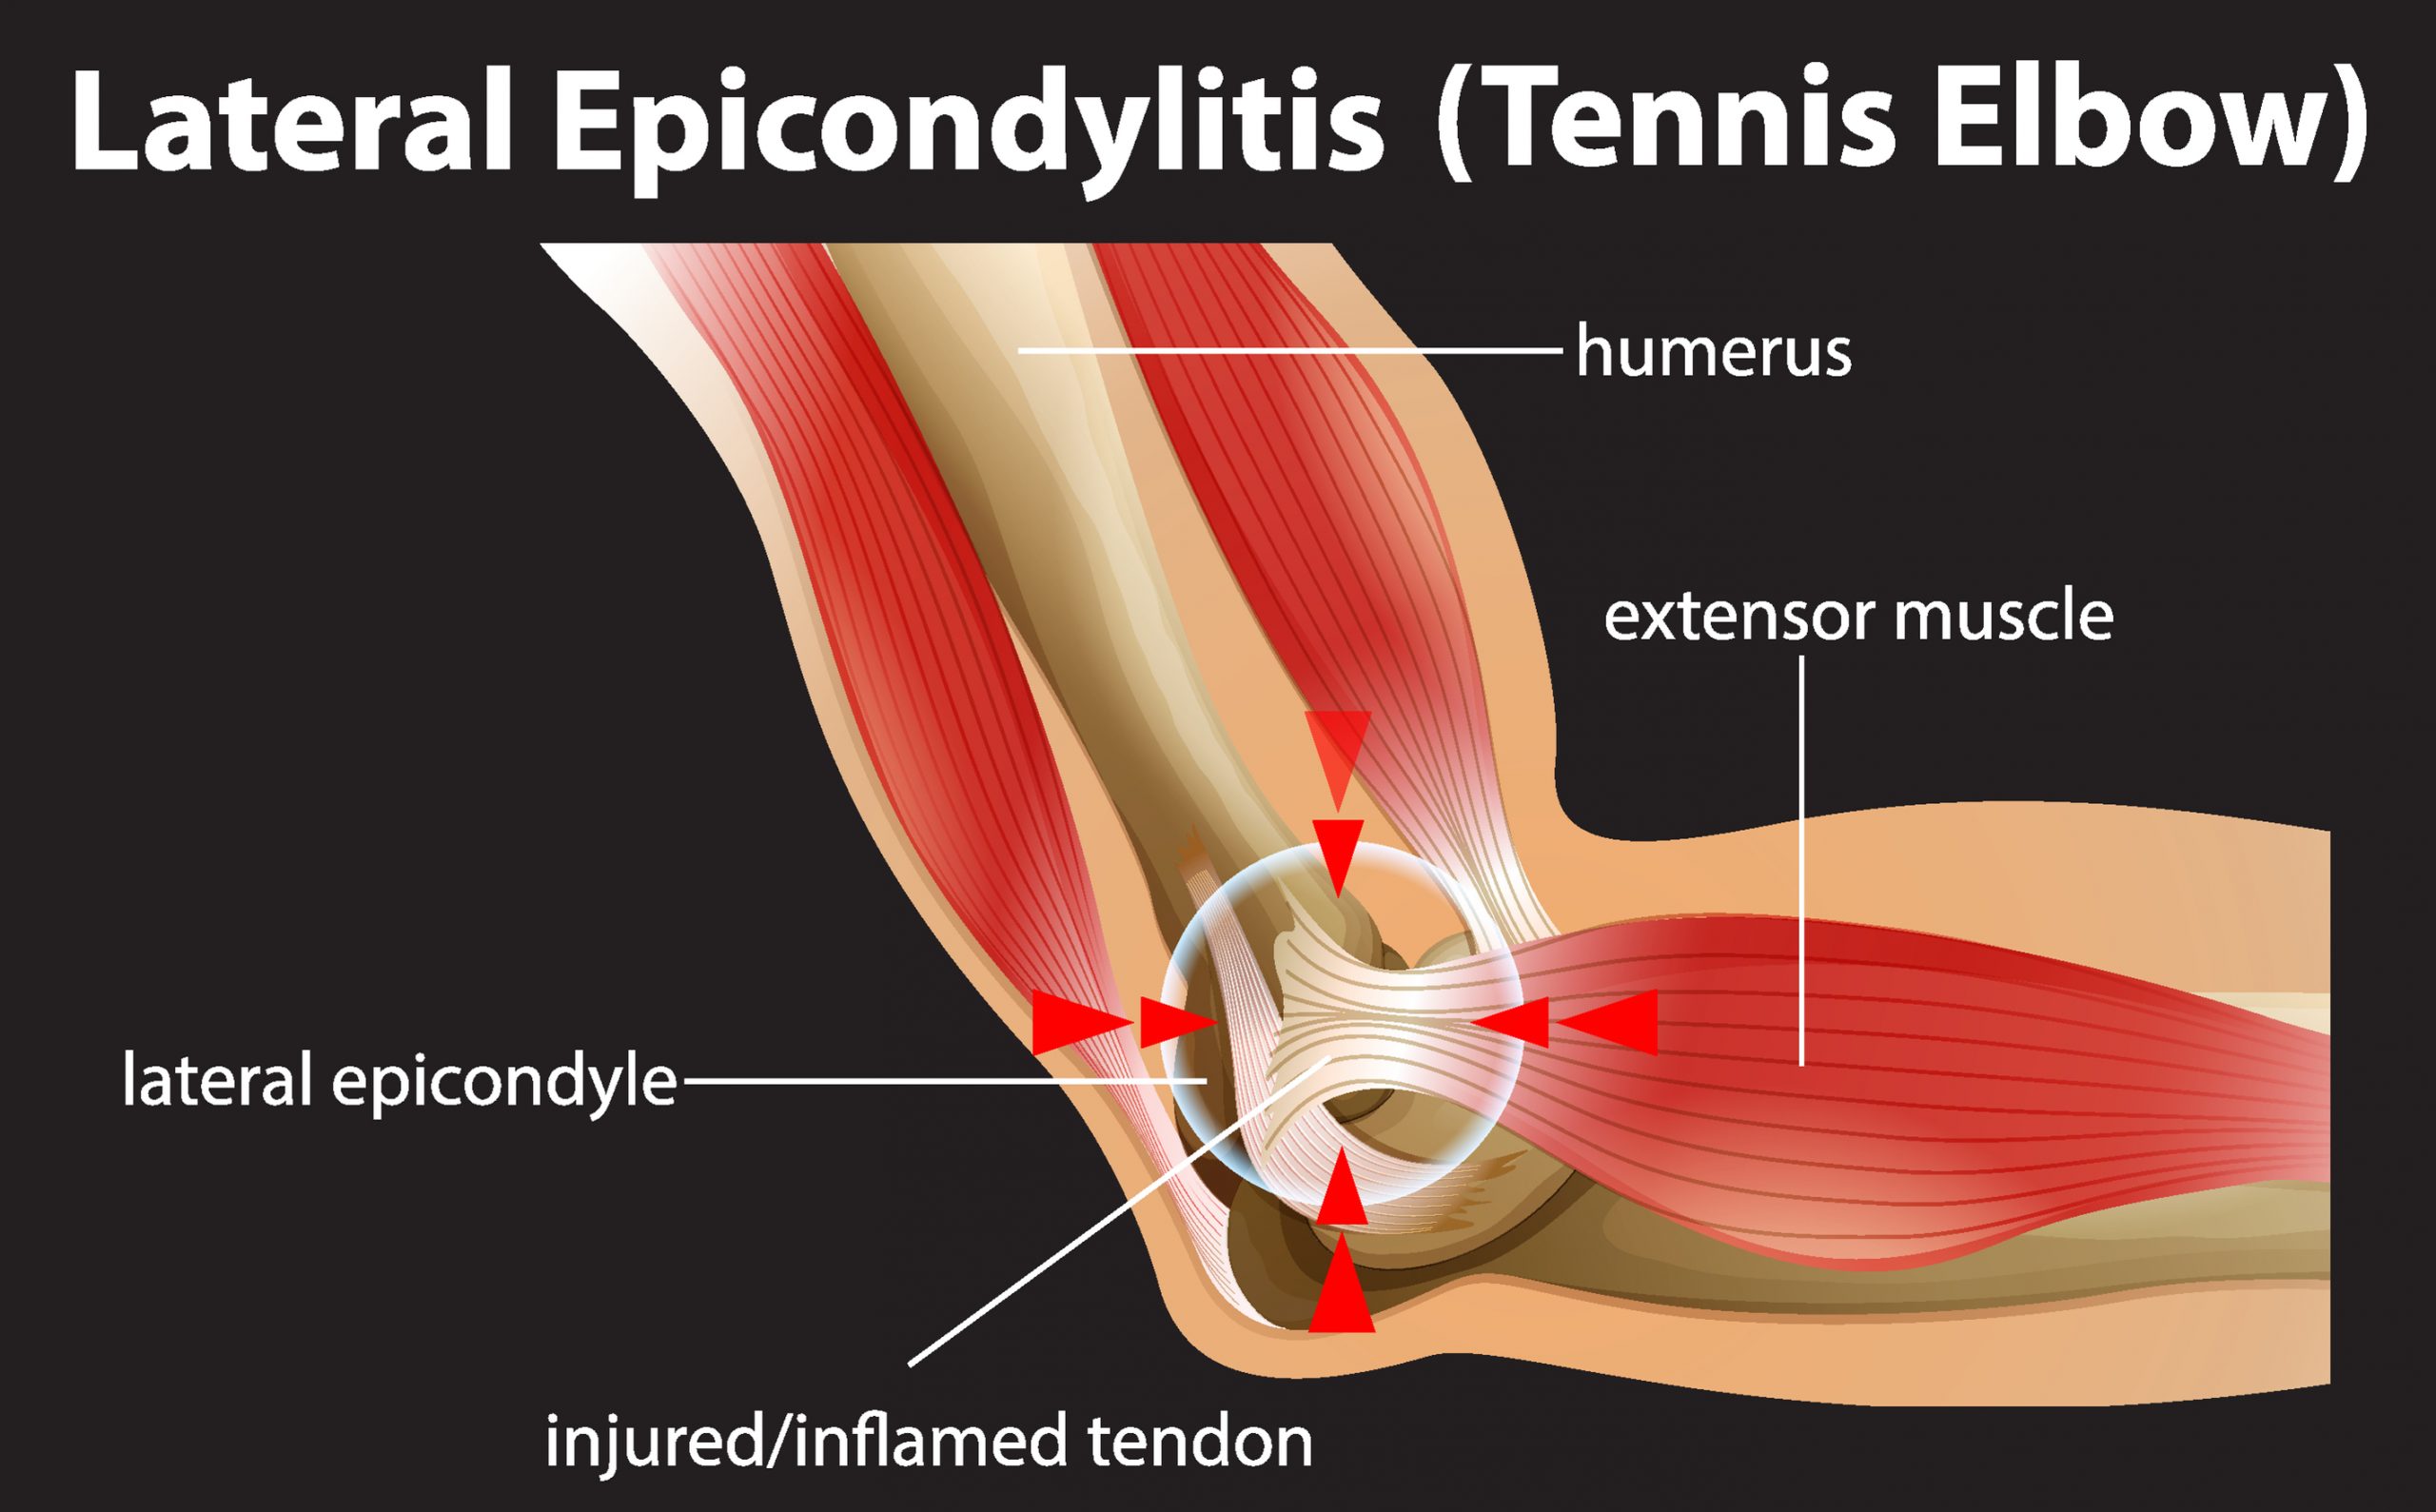 What Is Prolotherapy For Tennis Elbow In La Jolla?